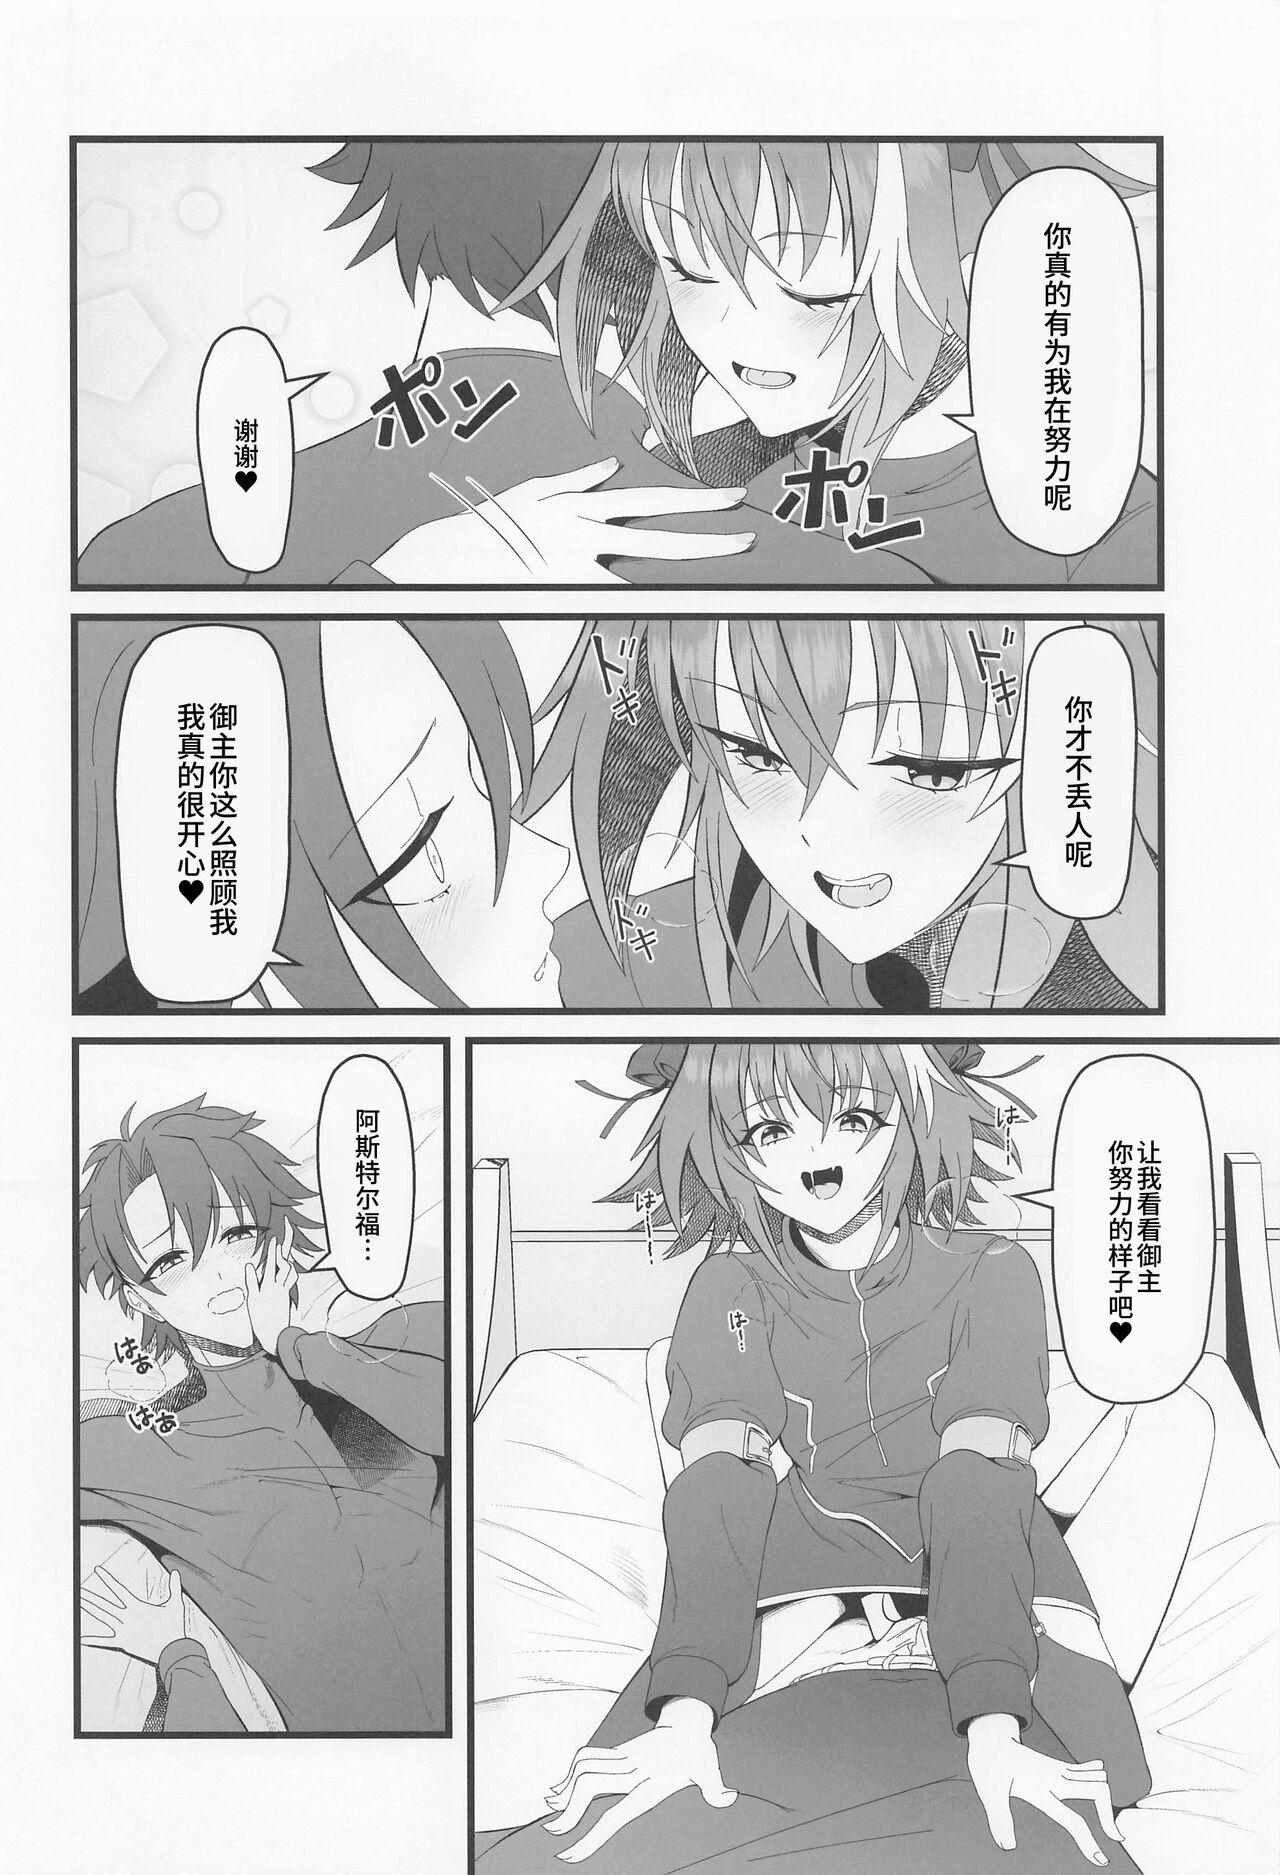 Shorts Kimi no Ichiban ni Naritakute - I wanted to be your number one. - Fate grand order Erotica - Page 9